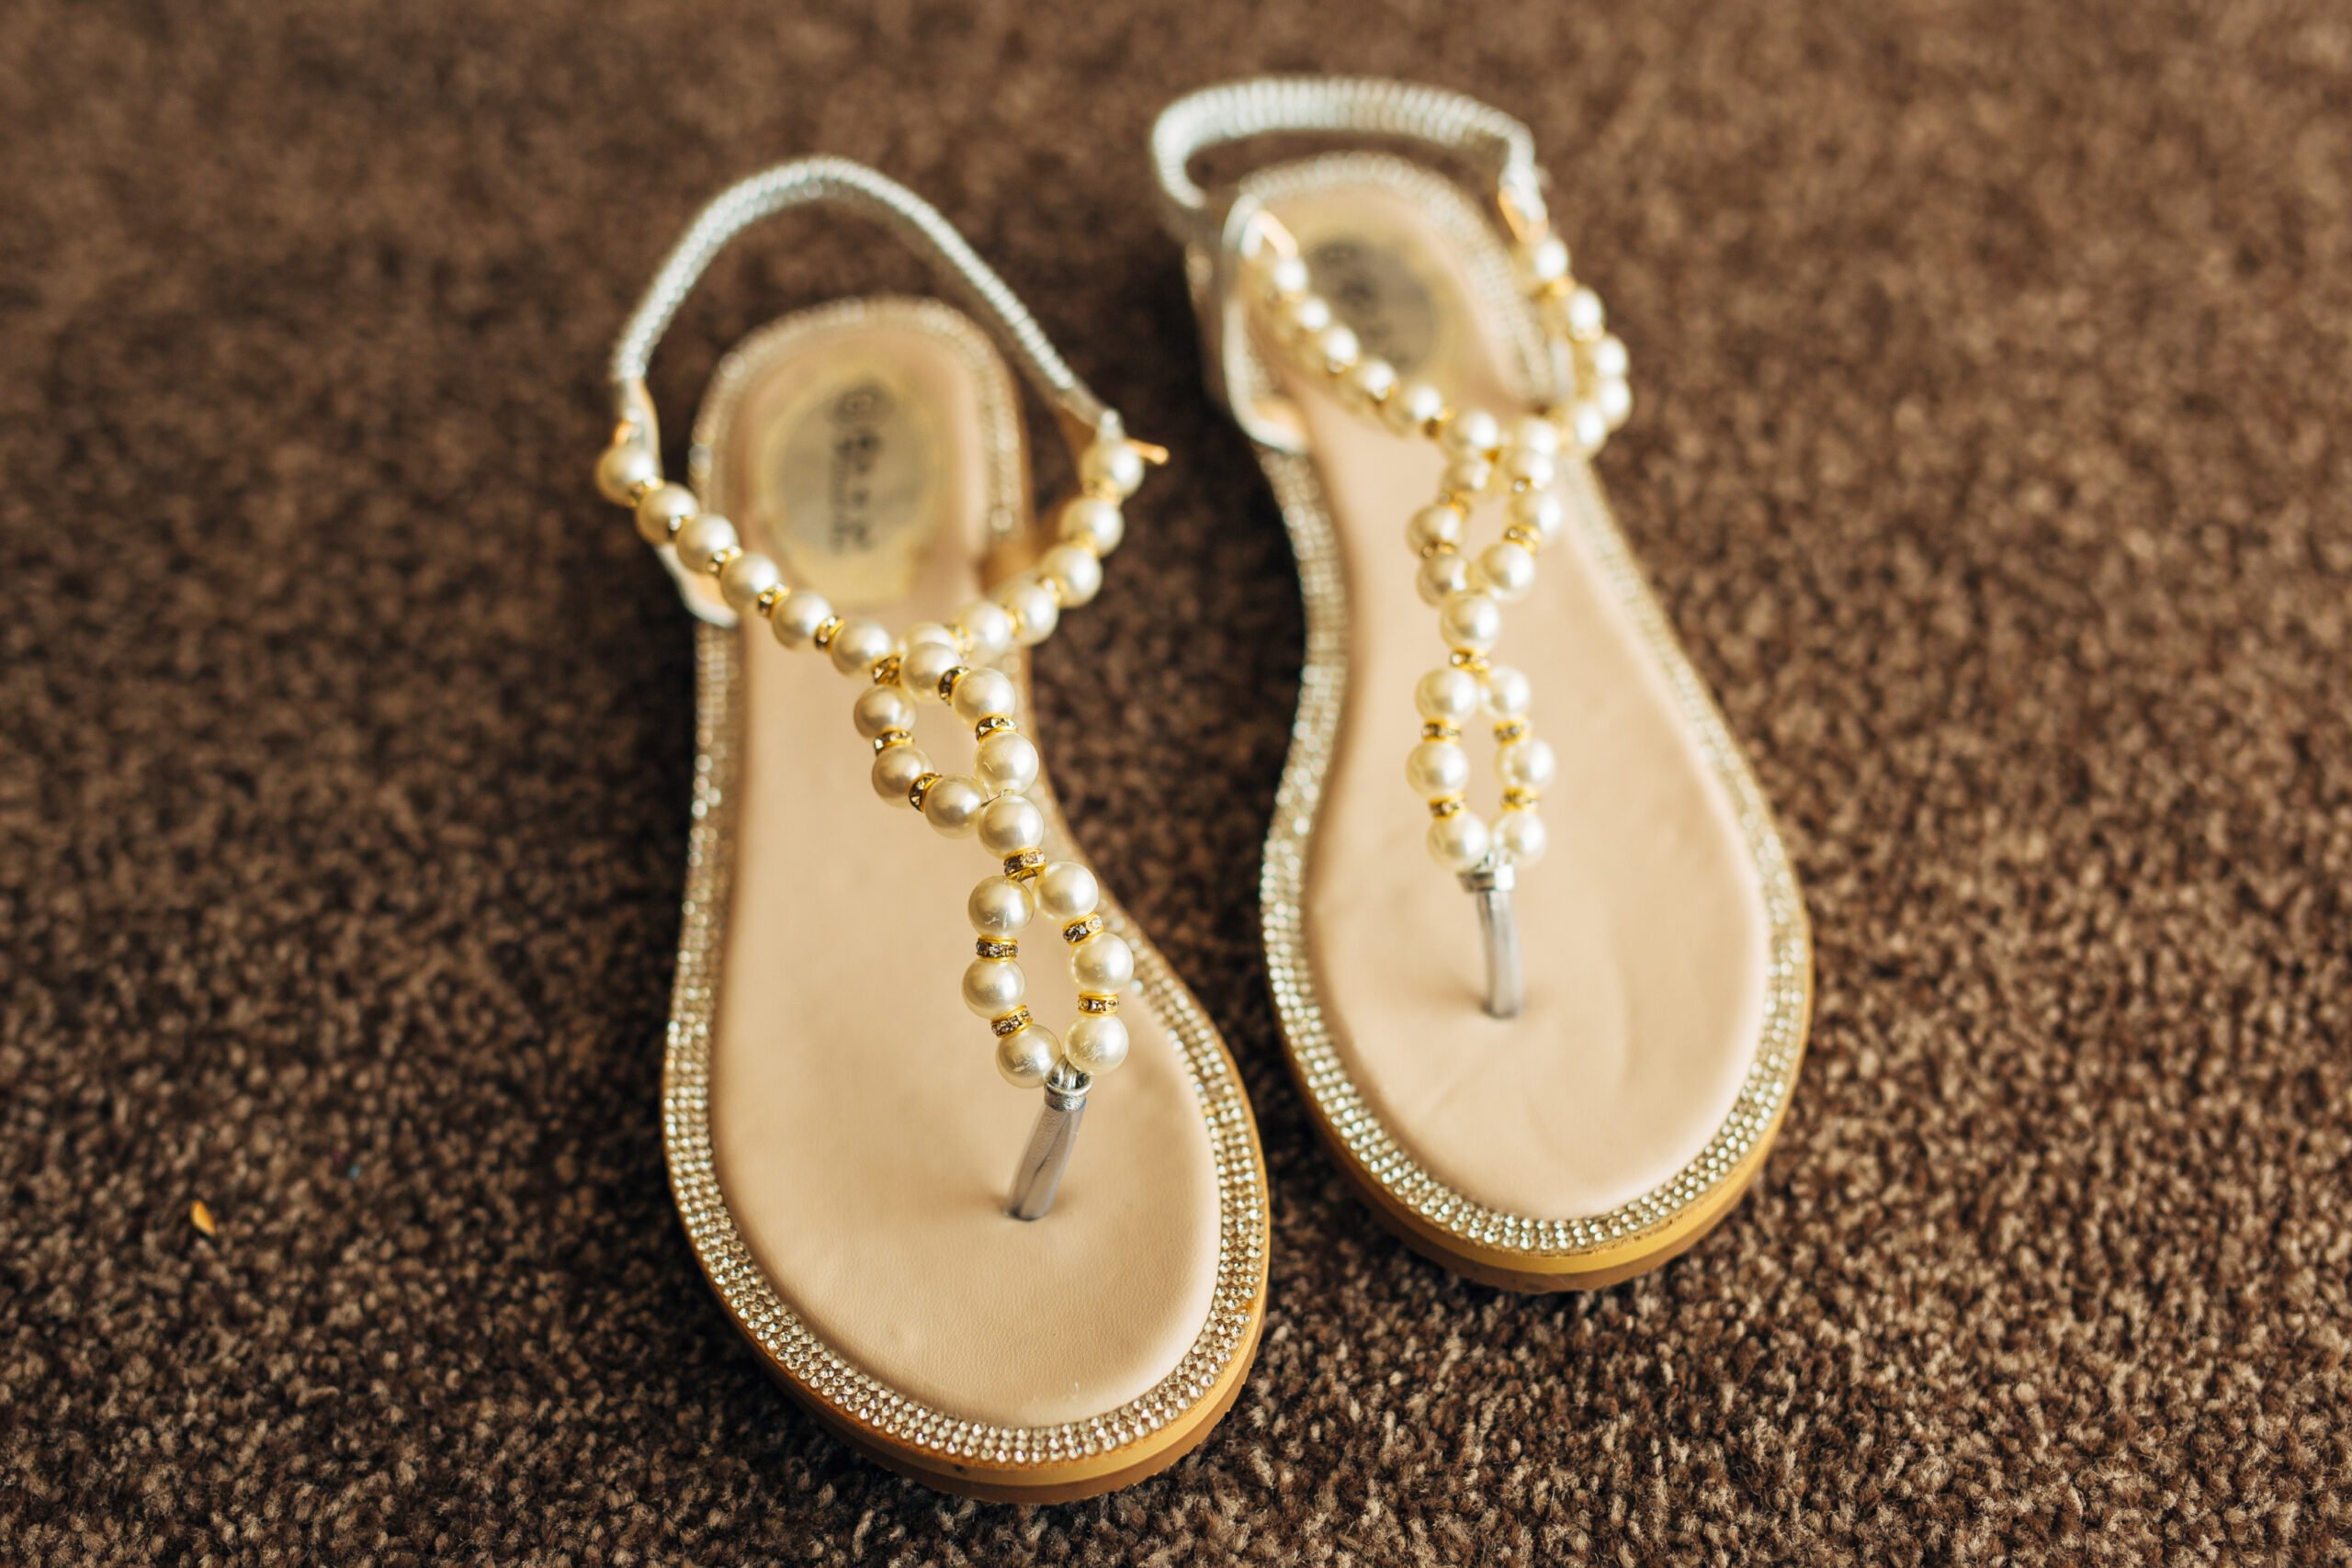 Sandals as non-traditional wedding shoes